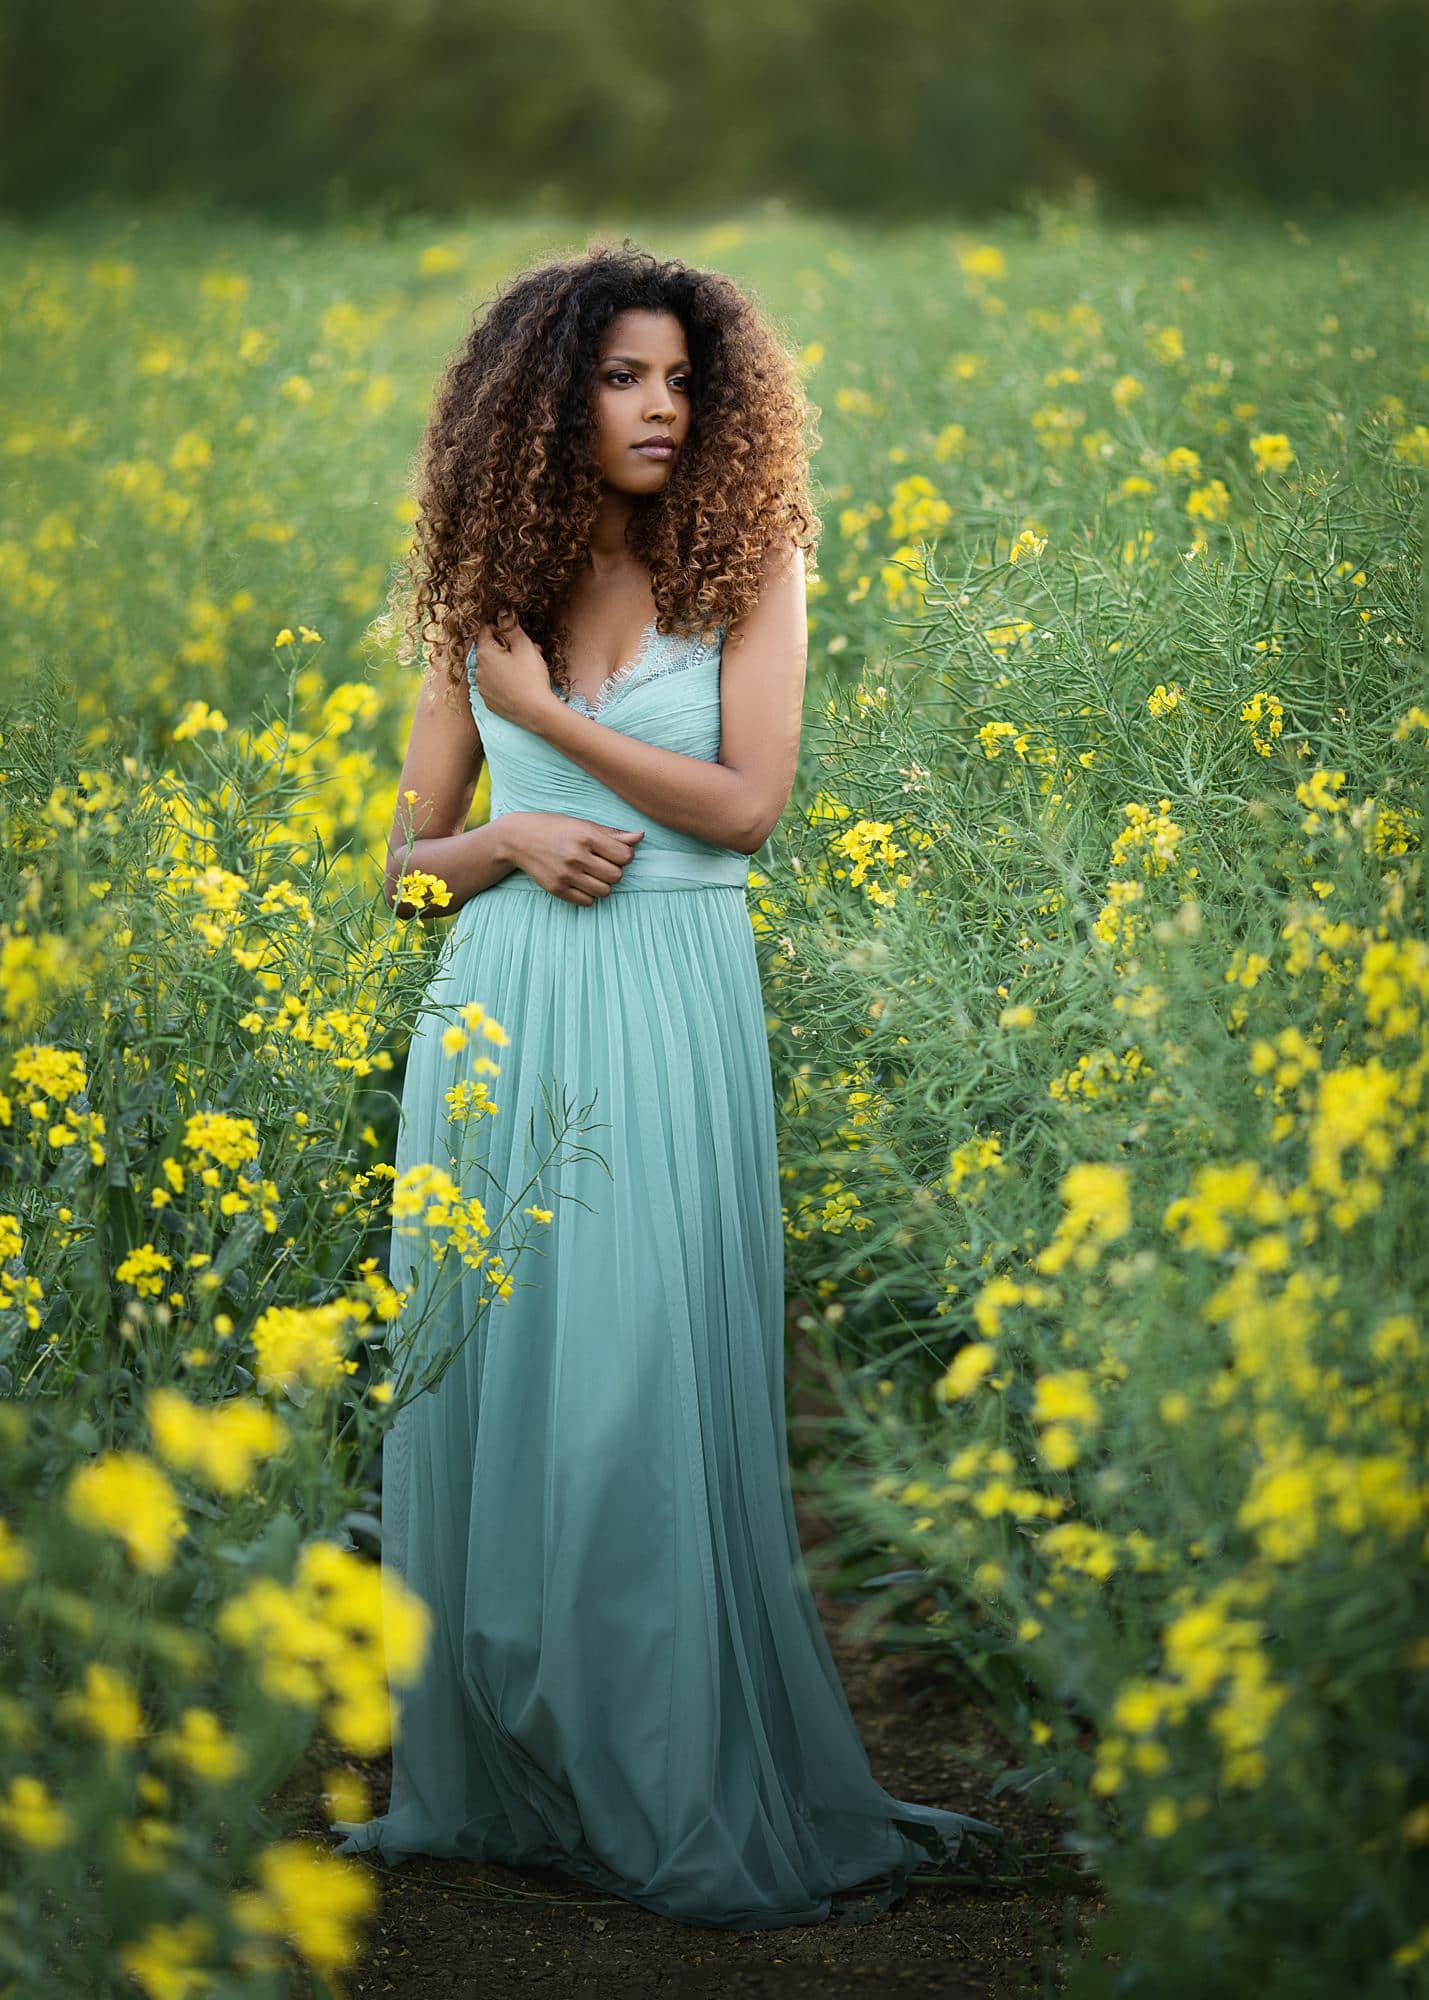 Brown haired woman in green dress poses for Beauty Shoot in a rape seed field Photoshoot in Suffolk